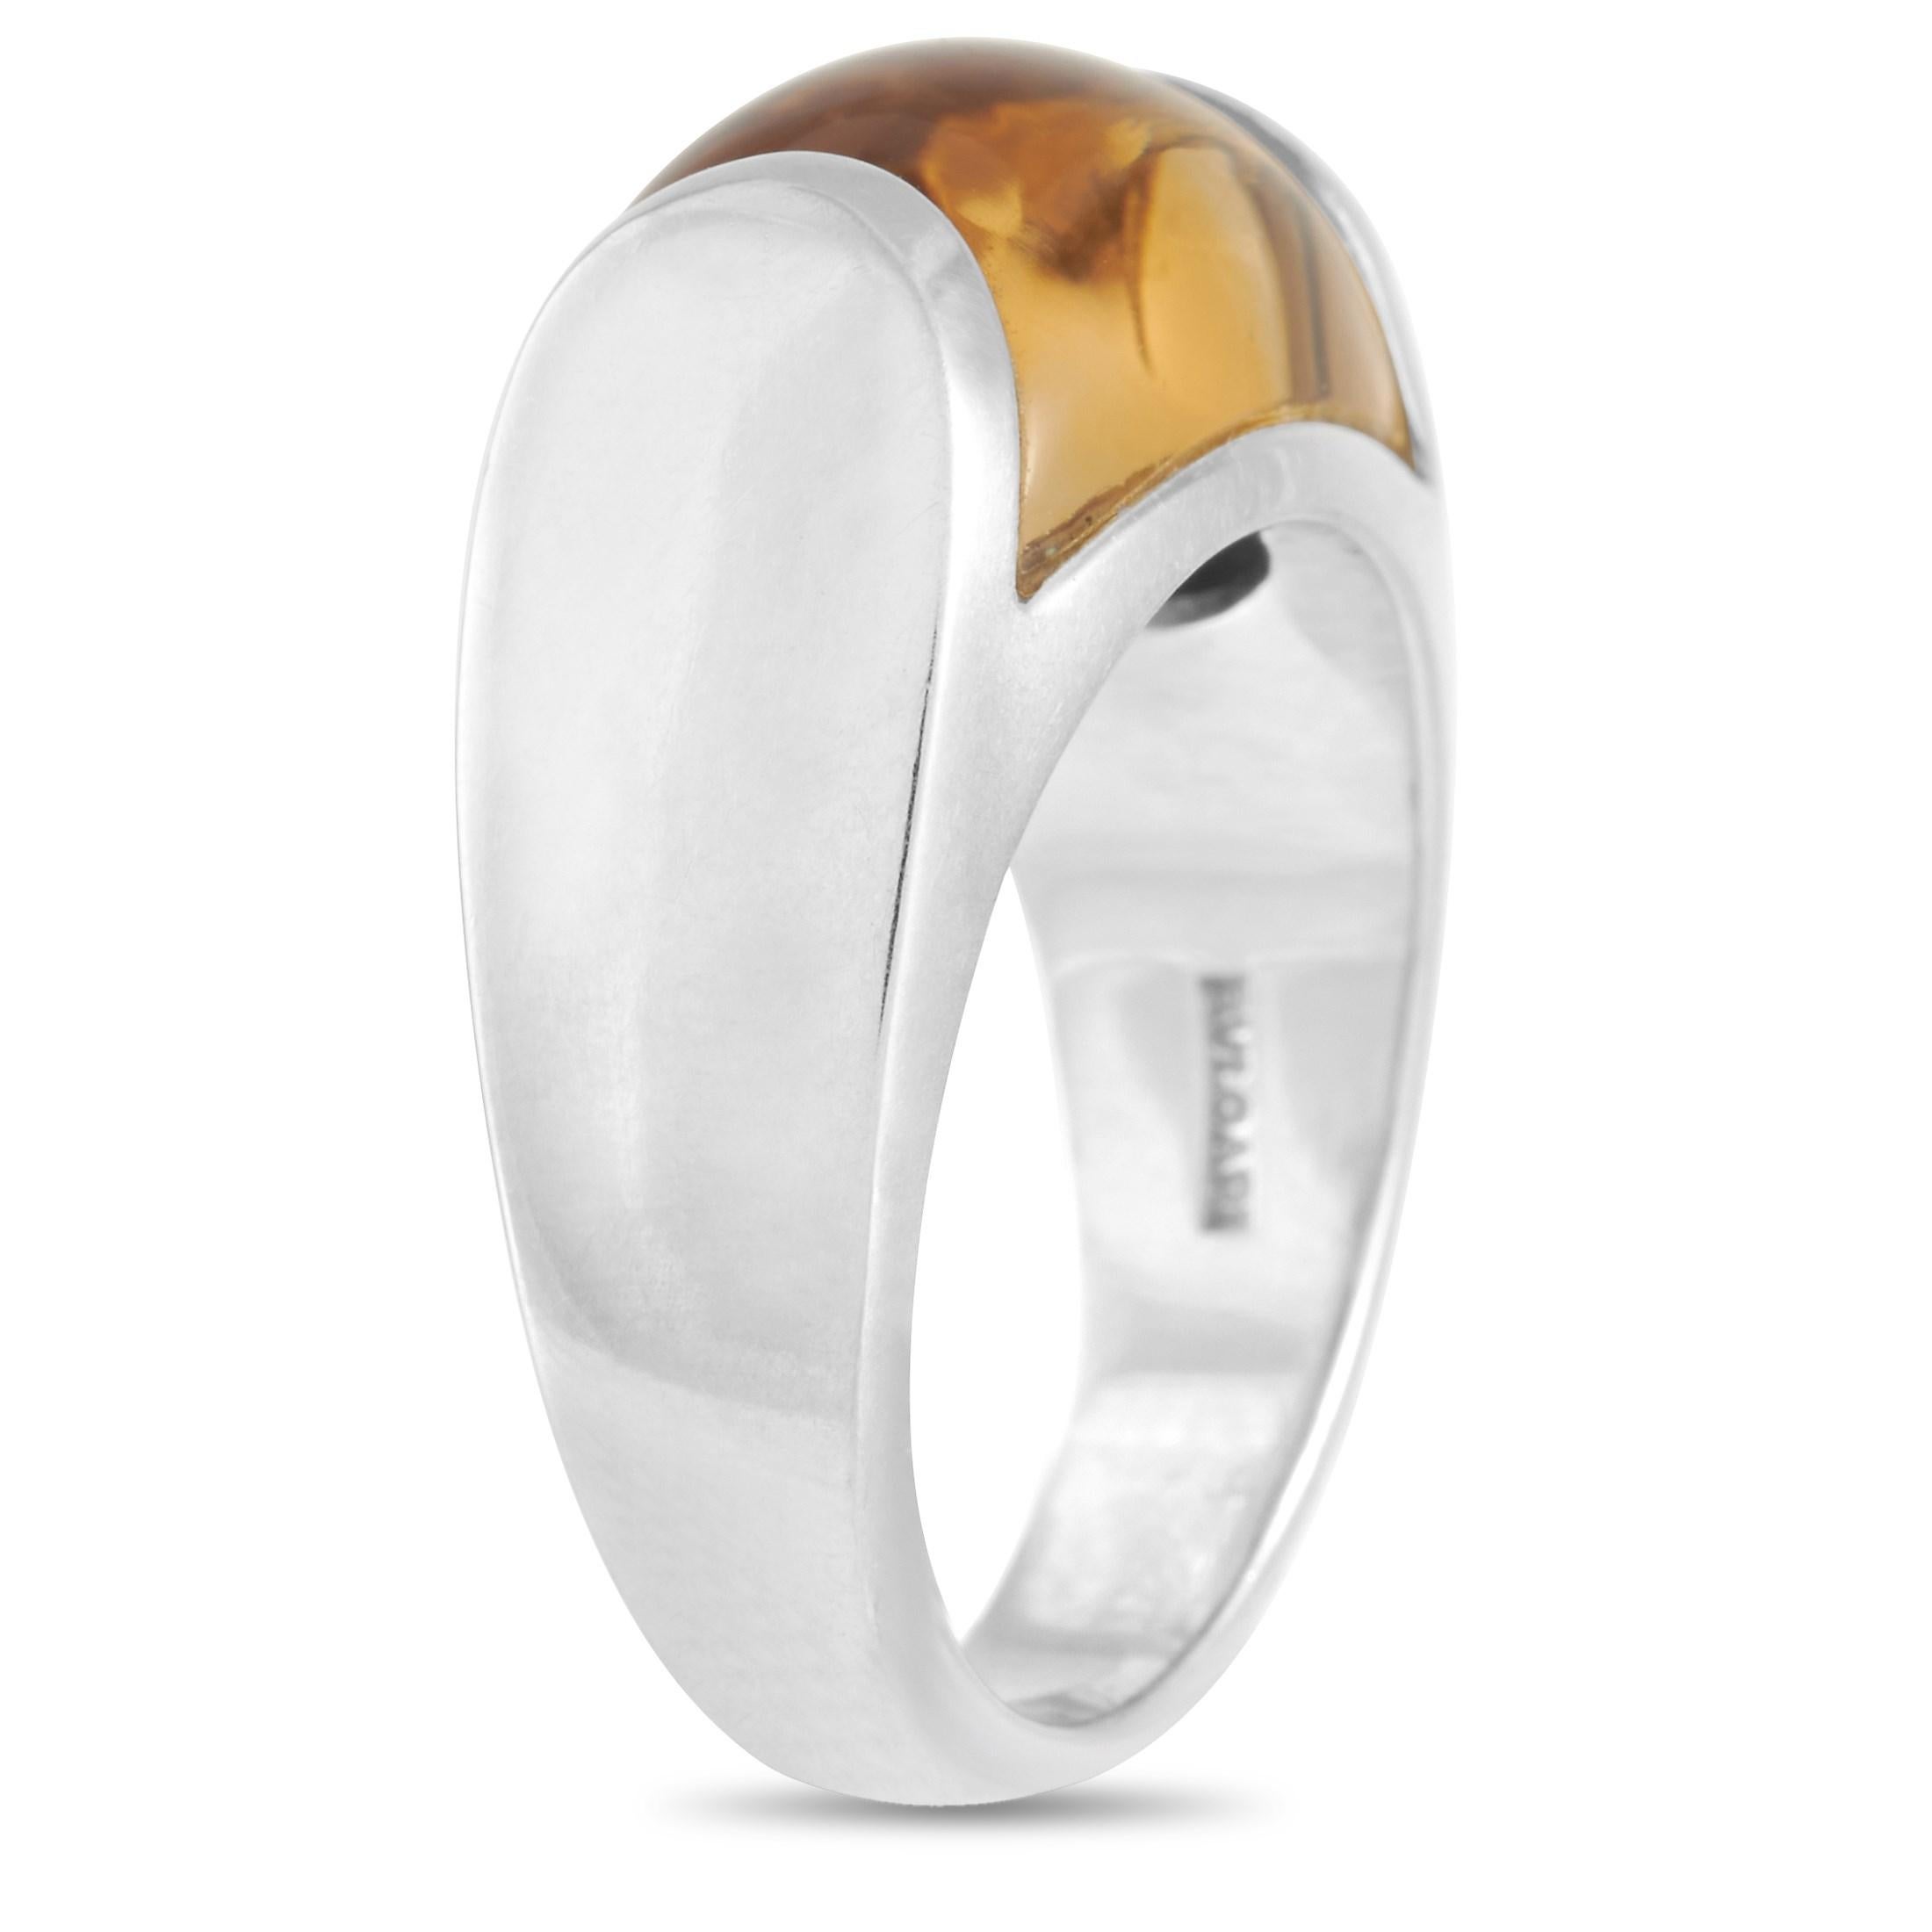 This Bvlgari Tronchetto 18K White Gold Citrine ring retains its simplicity while making a statement. The ring is made with 18K white gold and features a large citrine dome set into the band. The ring is stamped with the Bvlgari brand name on the